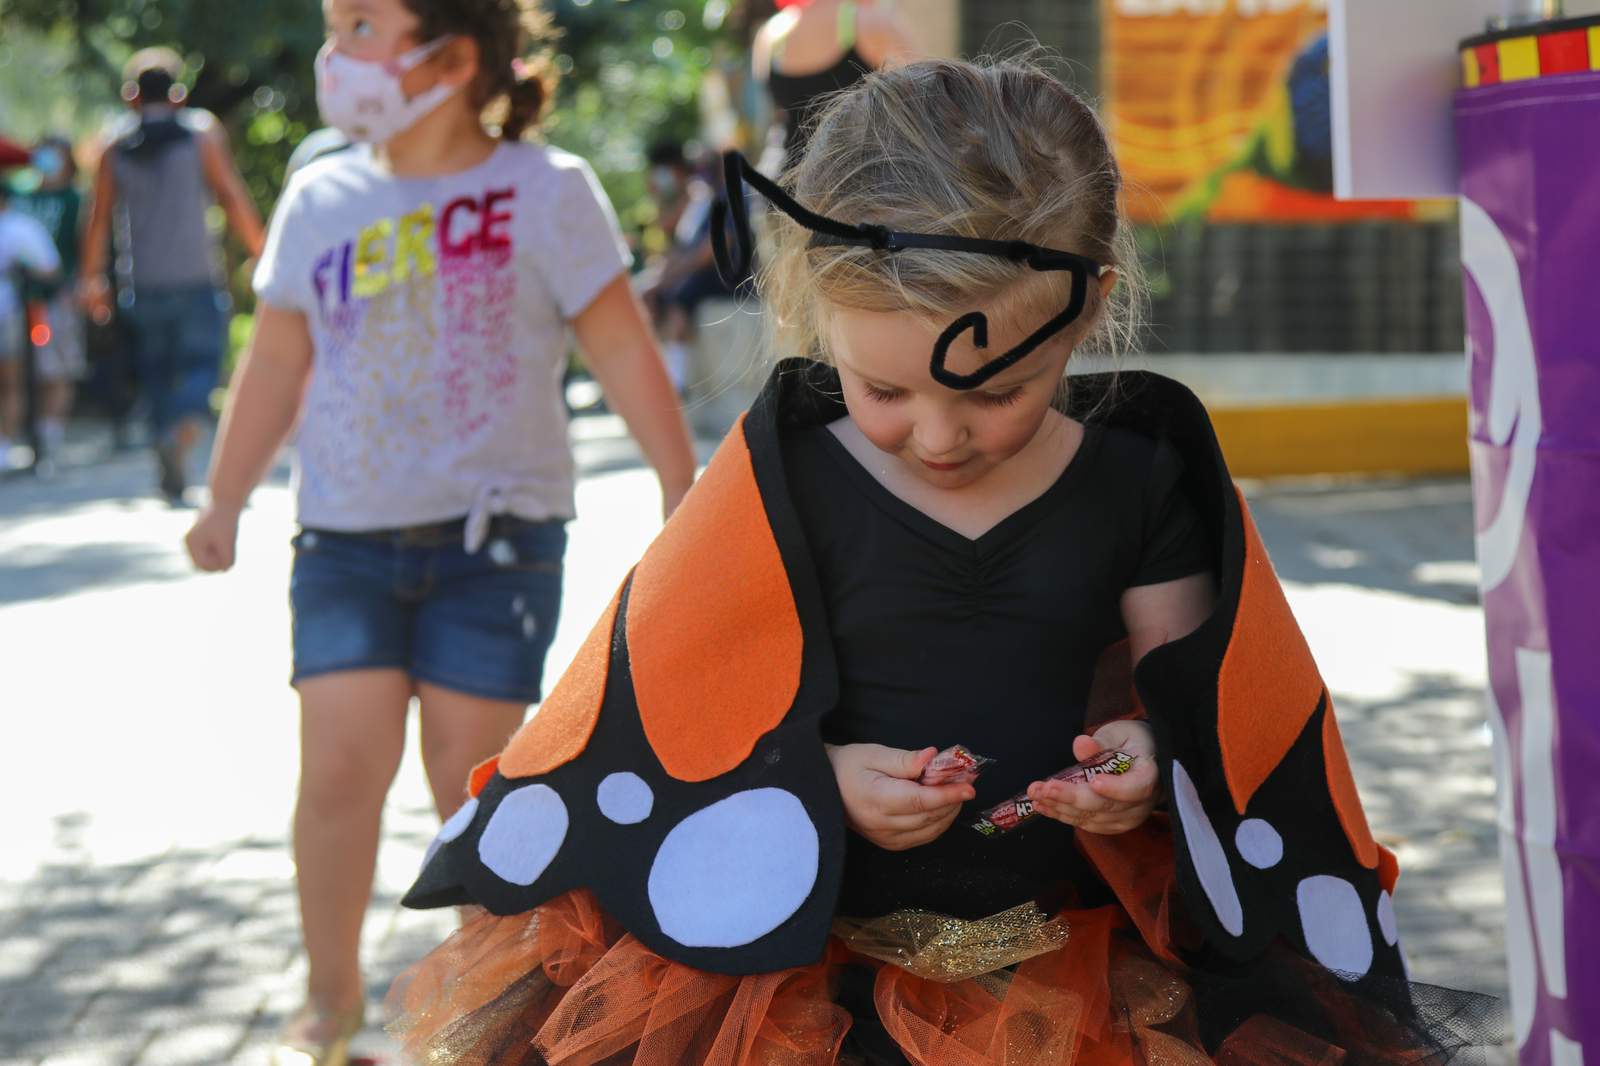 Free candy anyone? San Antonio Zoo hosts Día De Candy, will hand out candy to trick-or-treaters